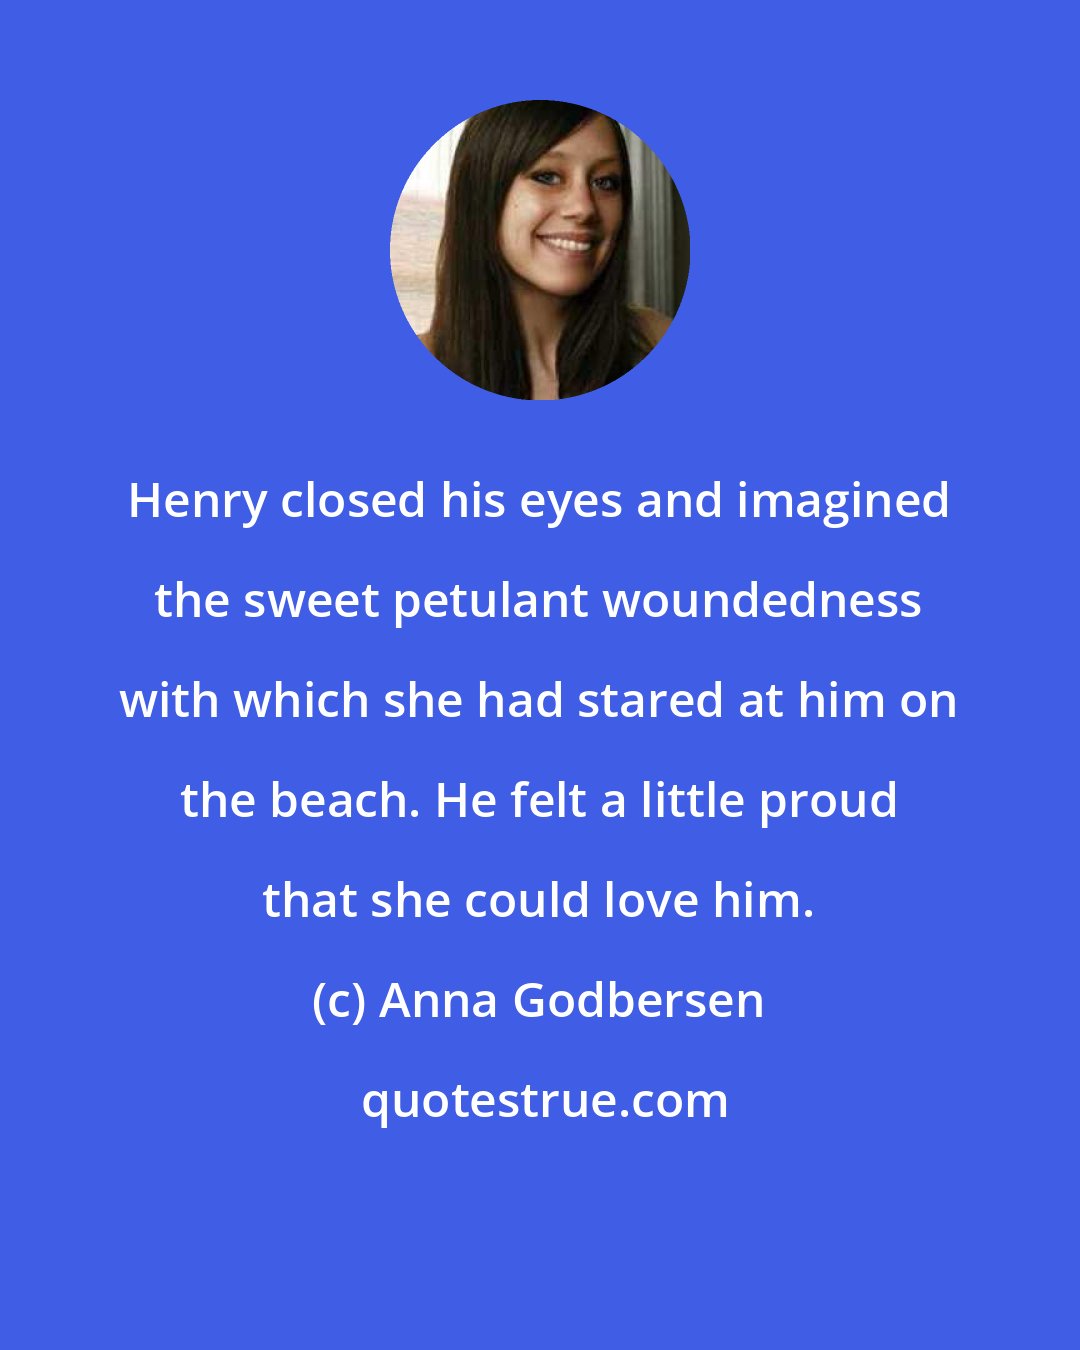 Anna Godbersen: Henry closed his eyes and imagined the sweet petulant woundedness with which she had stared at him on the beach. He felt a little proud that she could love him.